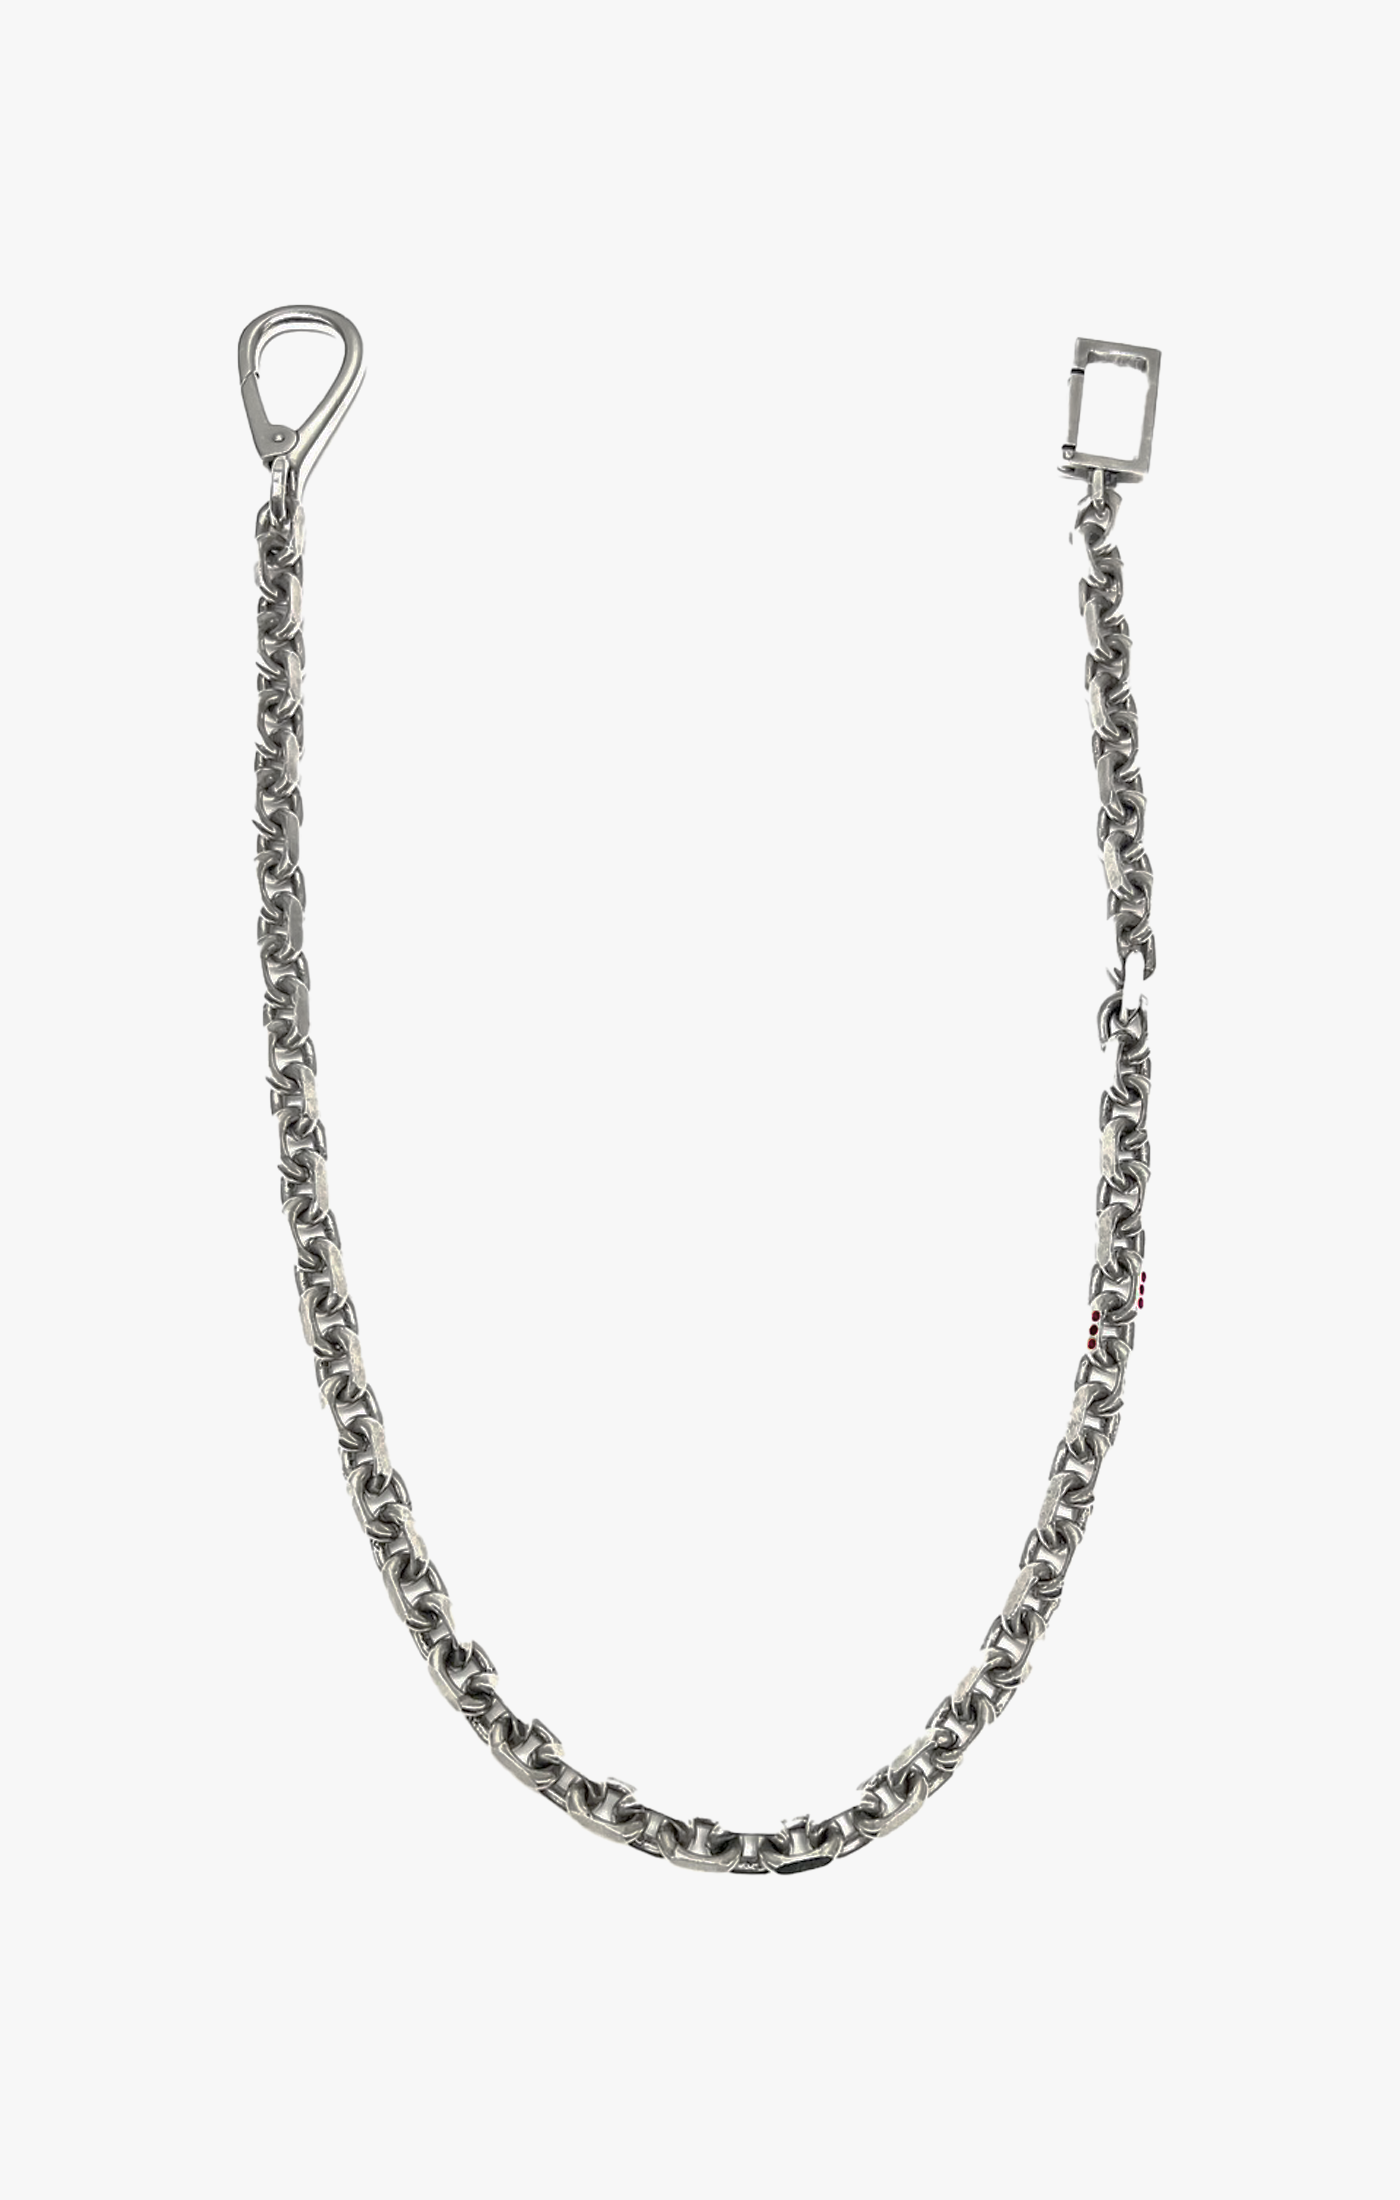 this wallet chain is composed of oversized cable links, 12 inset red rubies on two of the links add a discreet yet luxurious touch of brilliance, finished with a custom rectangular clasp that attaches to your belt loop.